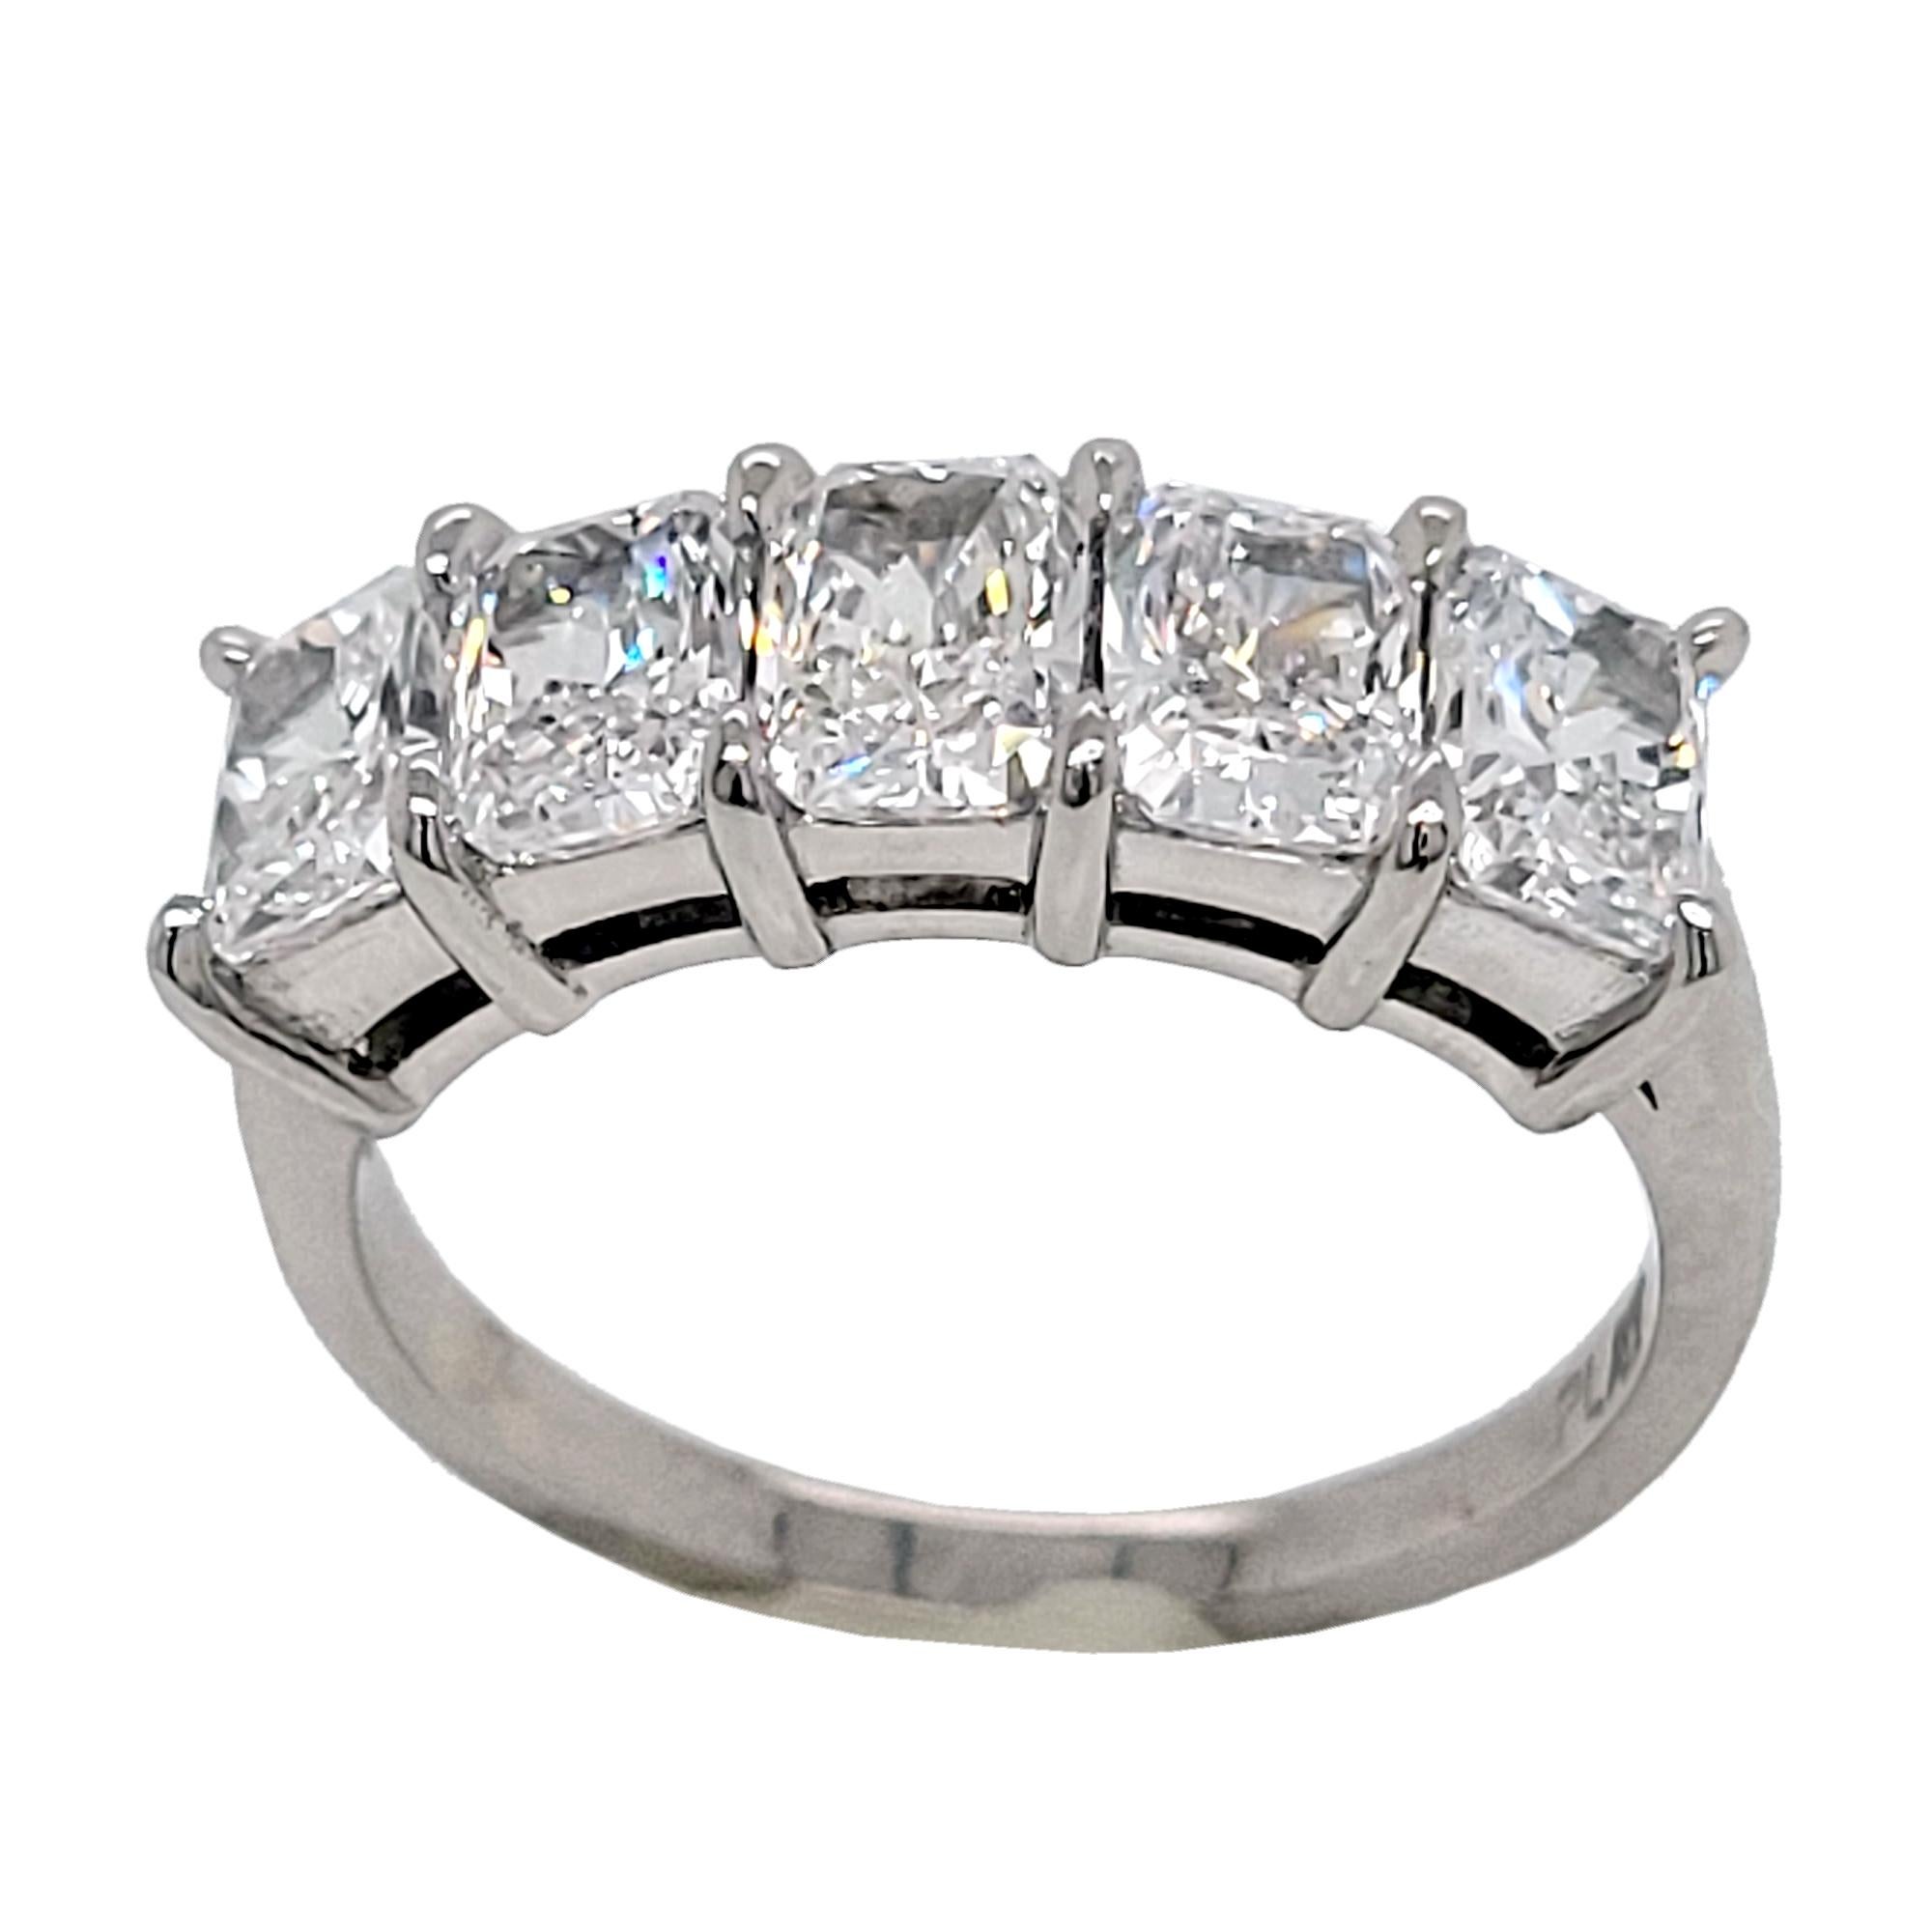 This beautiful Anniversary Ring is made in Platinum showcasing 5 perfectly matched GIA Certified  (VS1-VS2/D-F)  0.50 Ct Radiant Diamonds Set in Shared Prong Mode.
2 diamonds are D Color, 2 are W Color and 1 is F Color
4 diamonds is VS1  Clarity 